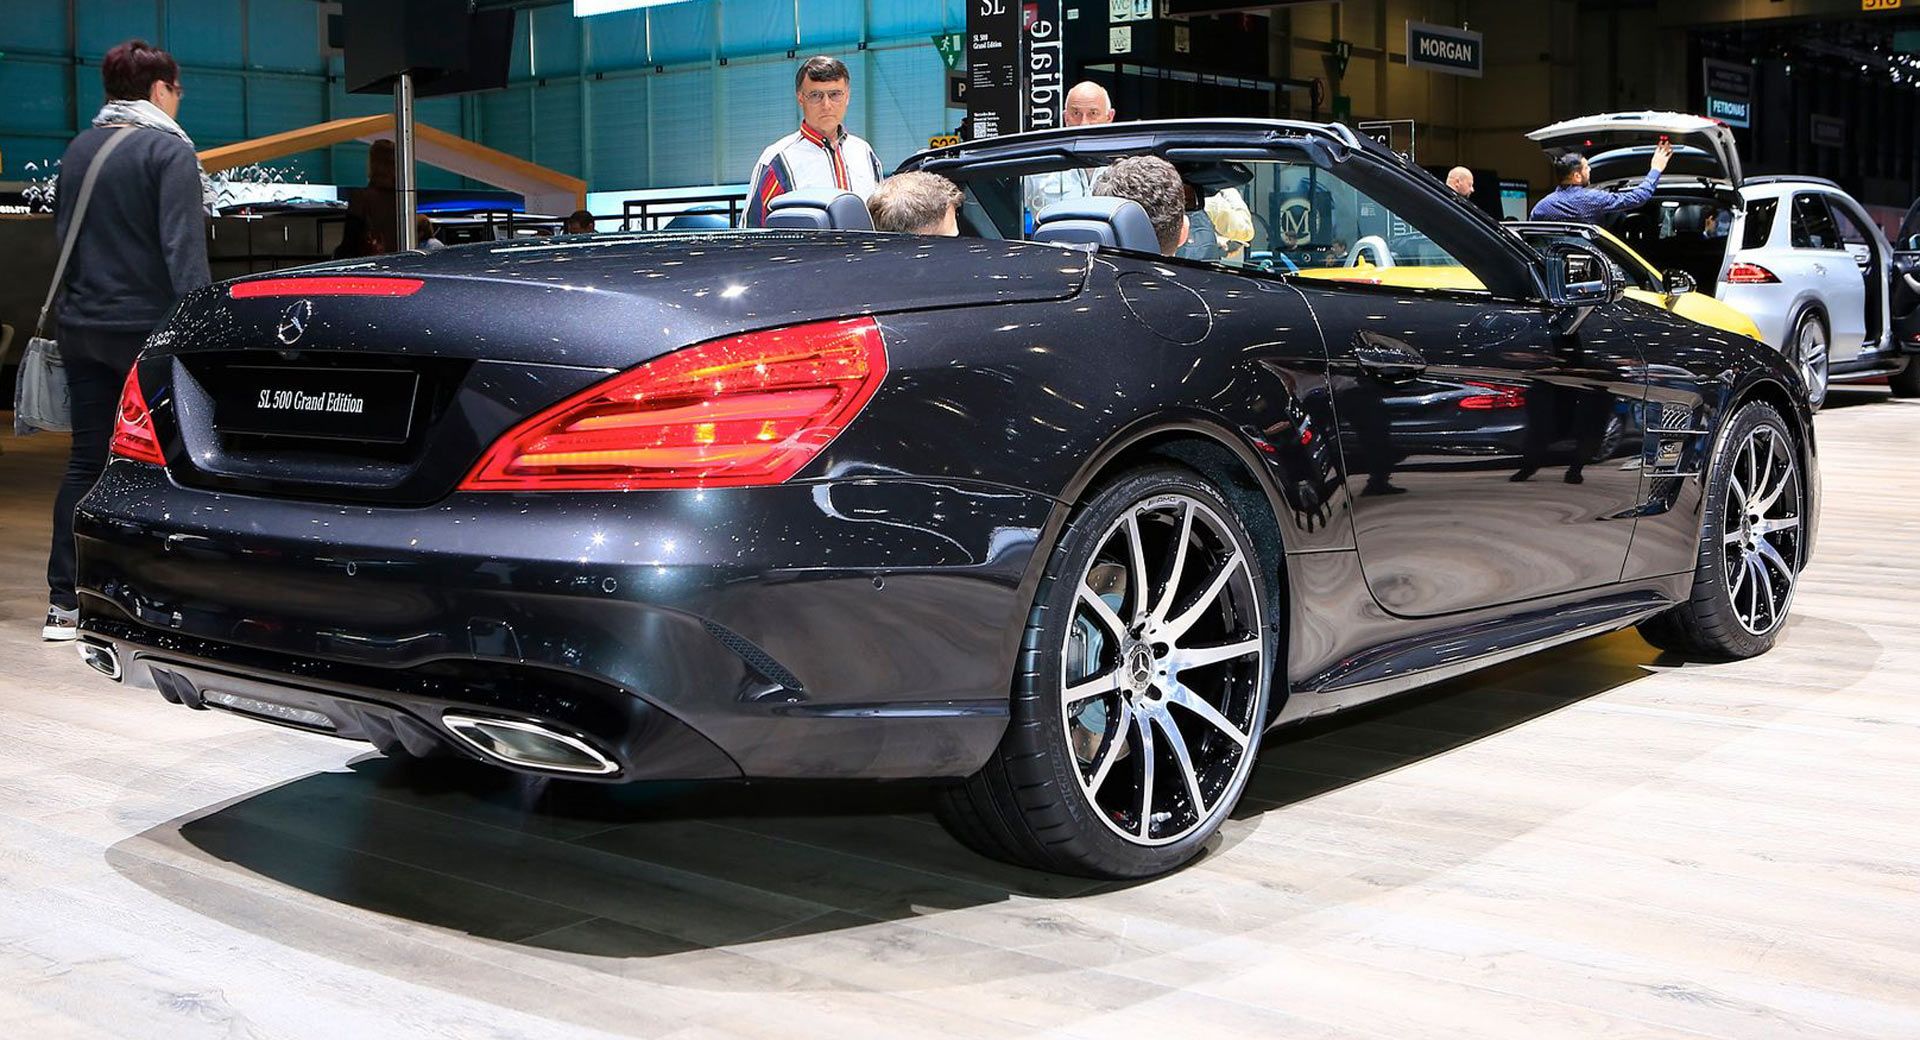 2020 Mercedes-Benz SL Grand Edition at an autoshow